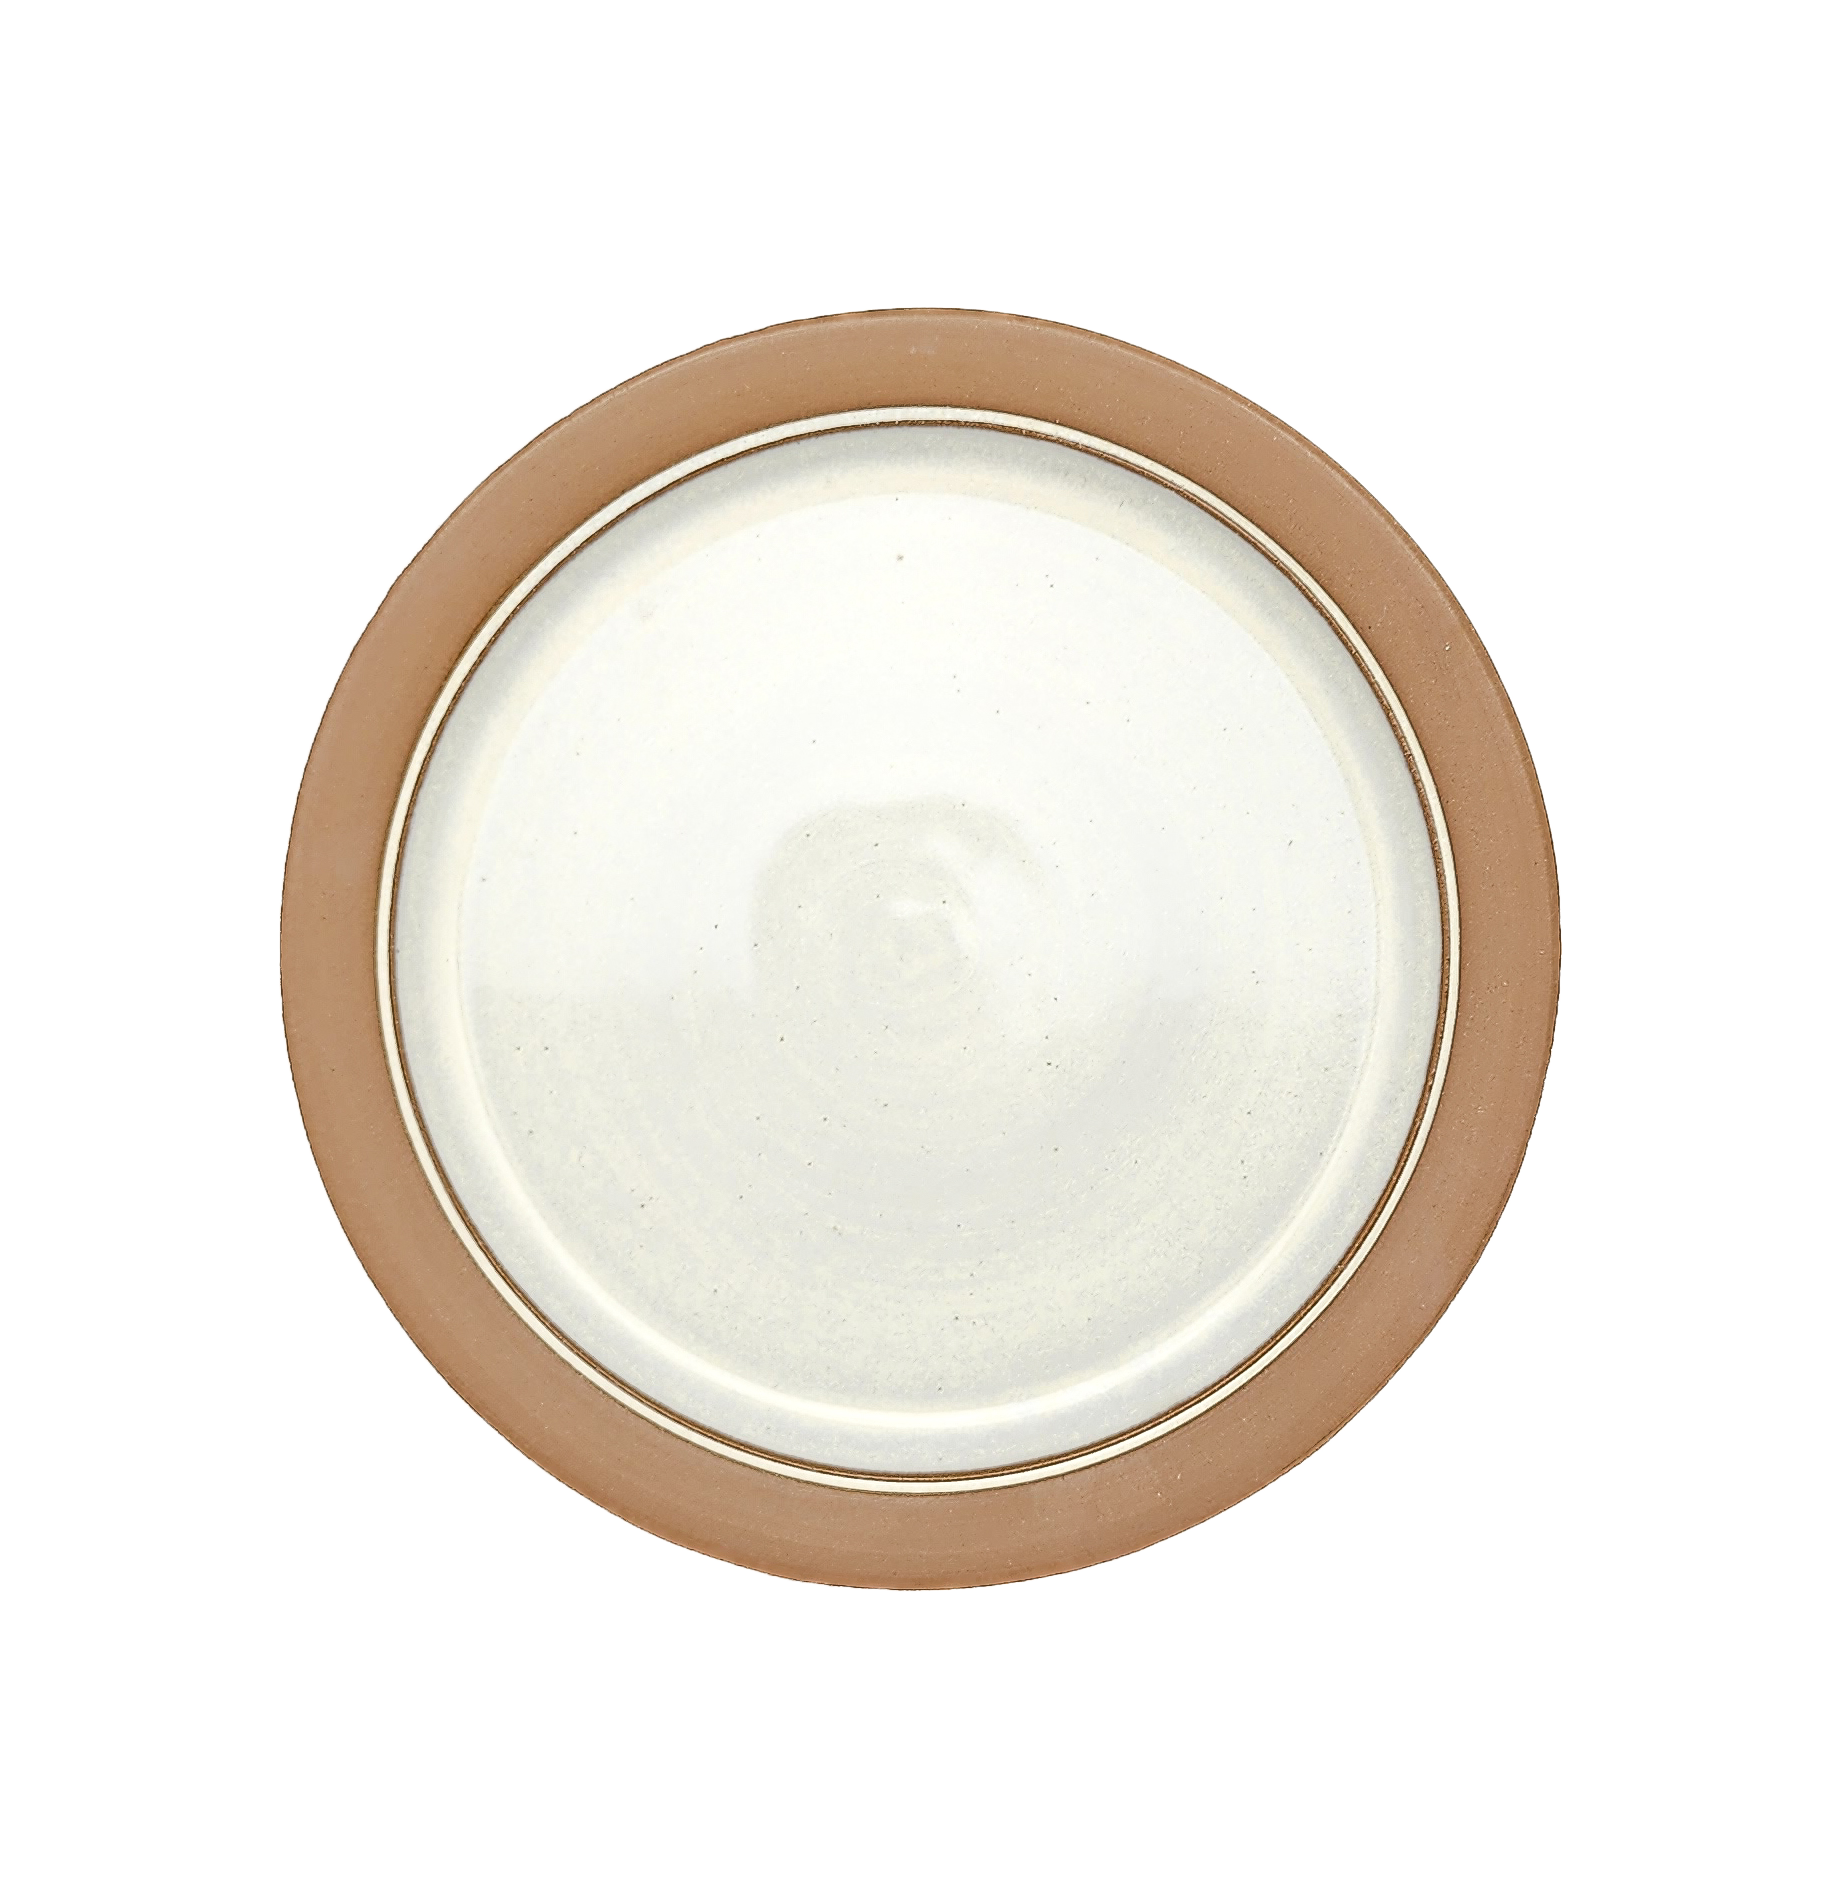 Image Description: A timeless natural (unglazed) dinner plate from Clinton Pottery's Handmade Dinnerware Collection. The 10-inch plate features a rustic and earthy texture, adding a touch of simplicity to your dining setting. Its ample size makes it perfect for serving a delightful dinner with a classic and natural aesthetic.